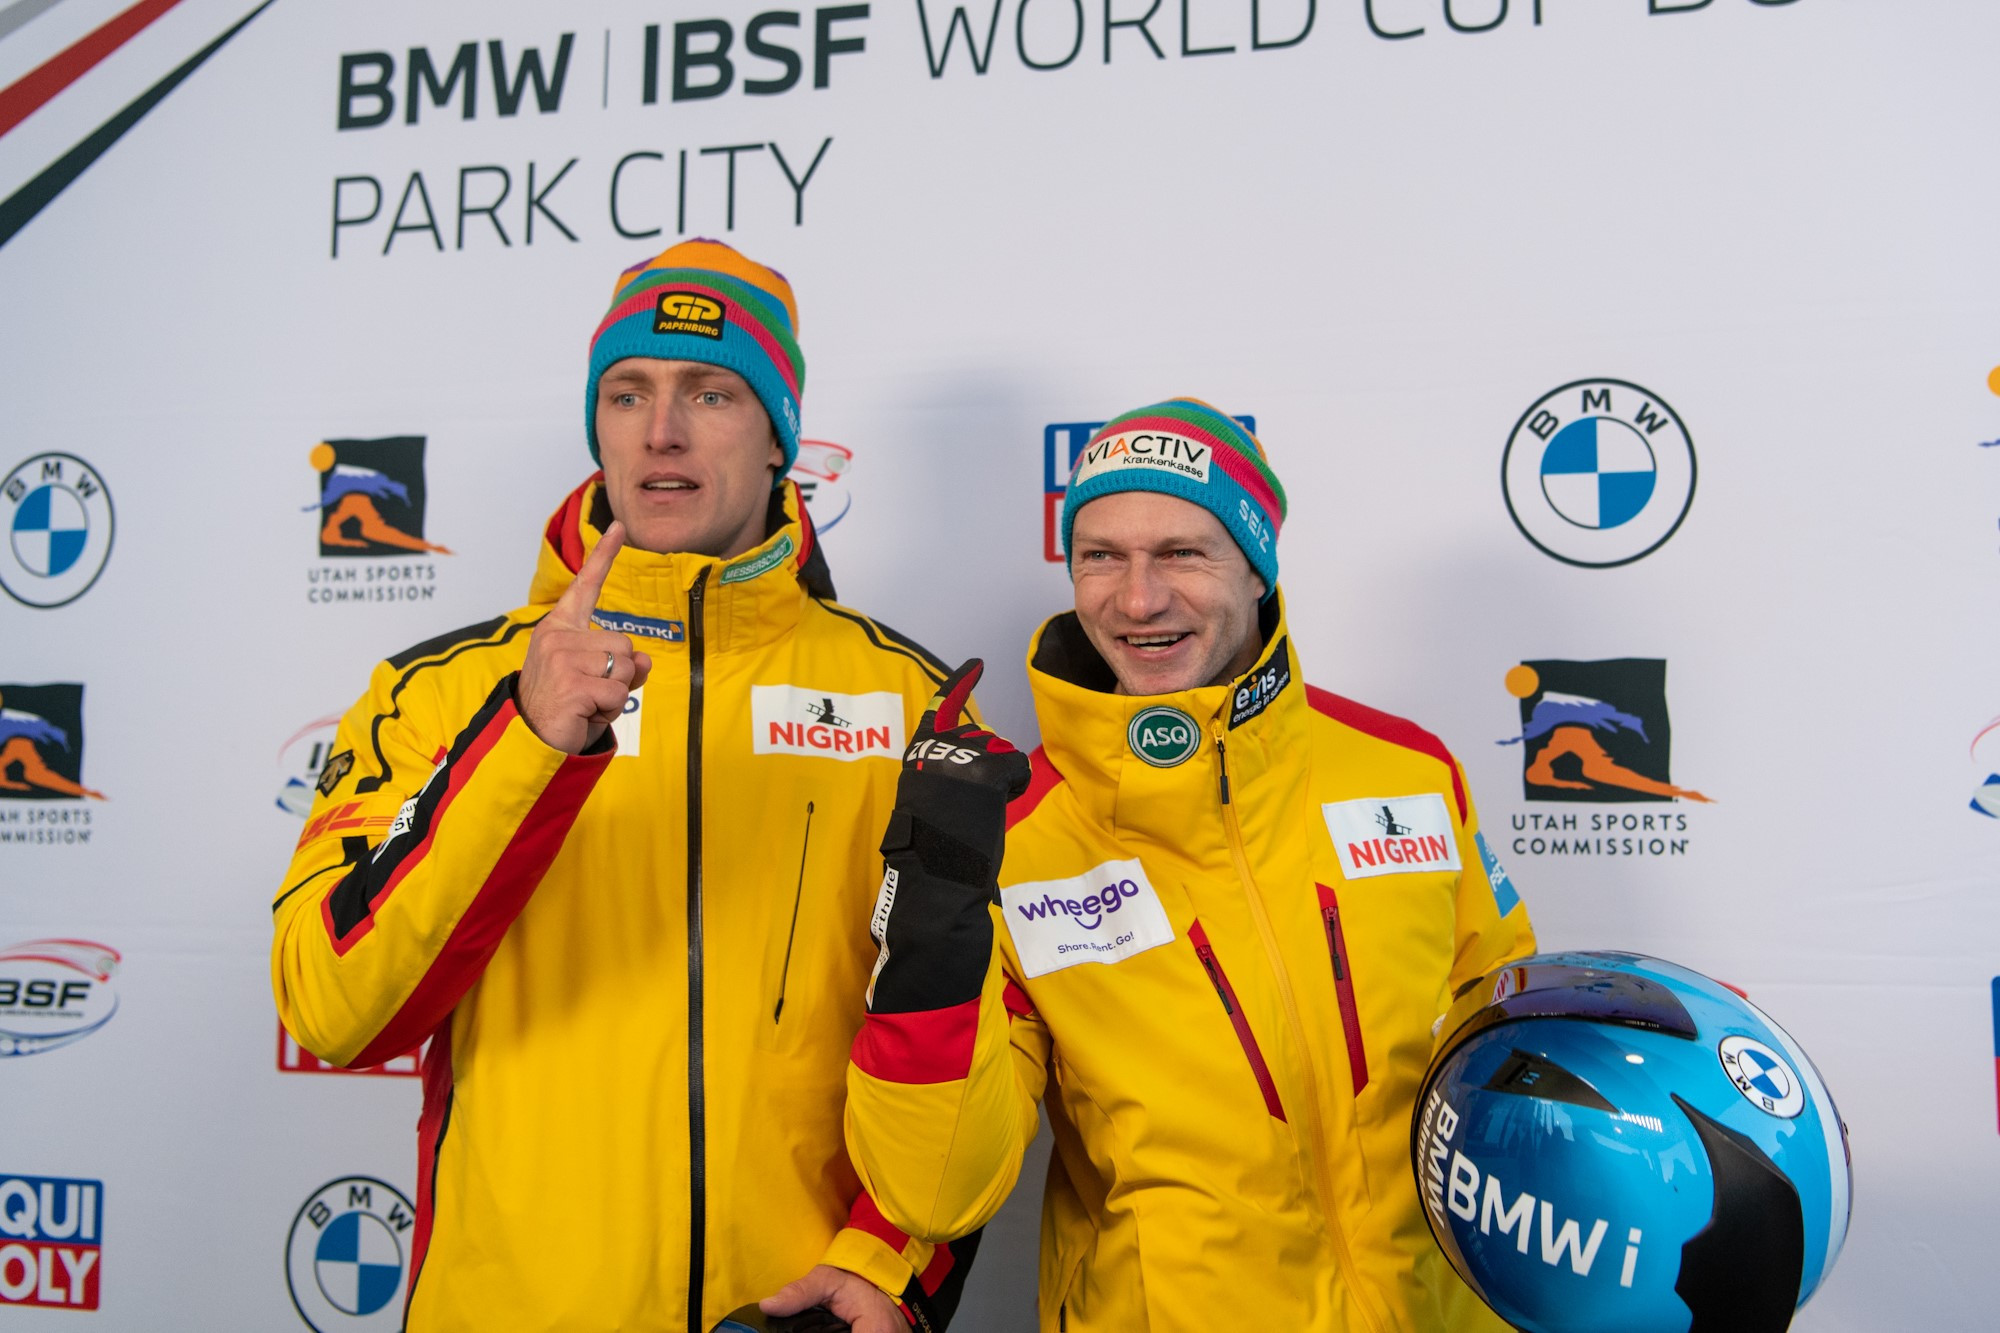 Germans shine at IBSF World Cup in Park City